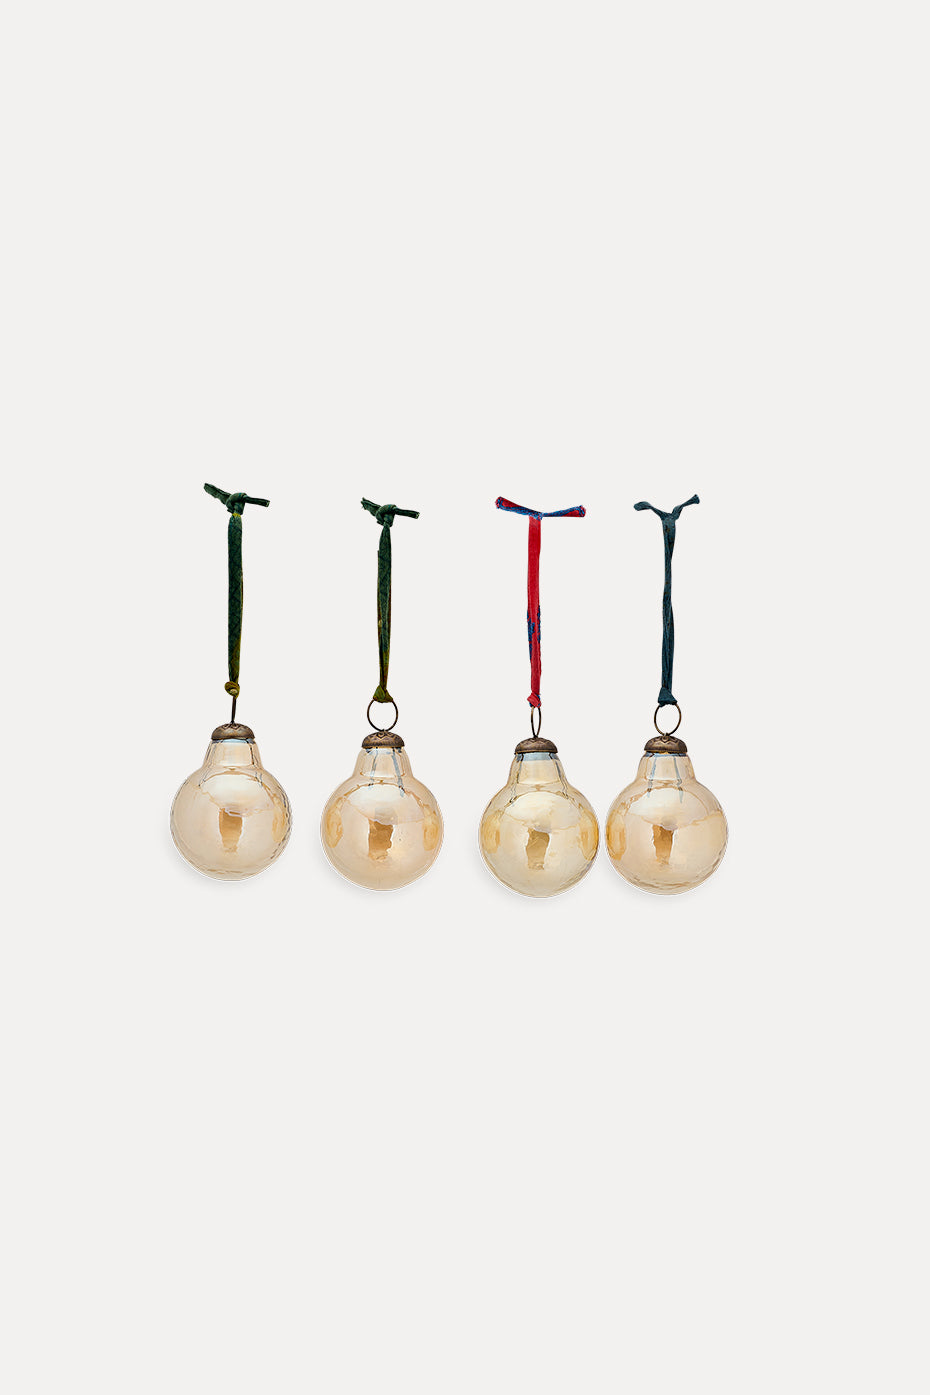 Aged Gold Alura Round Bauble - Set of 4